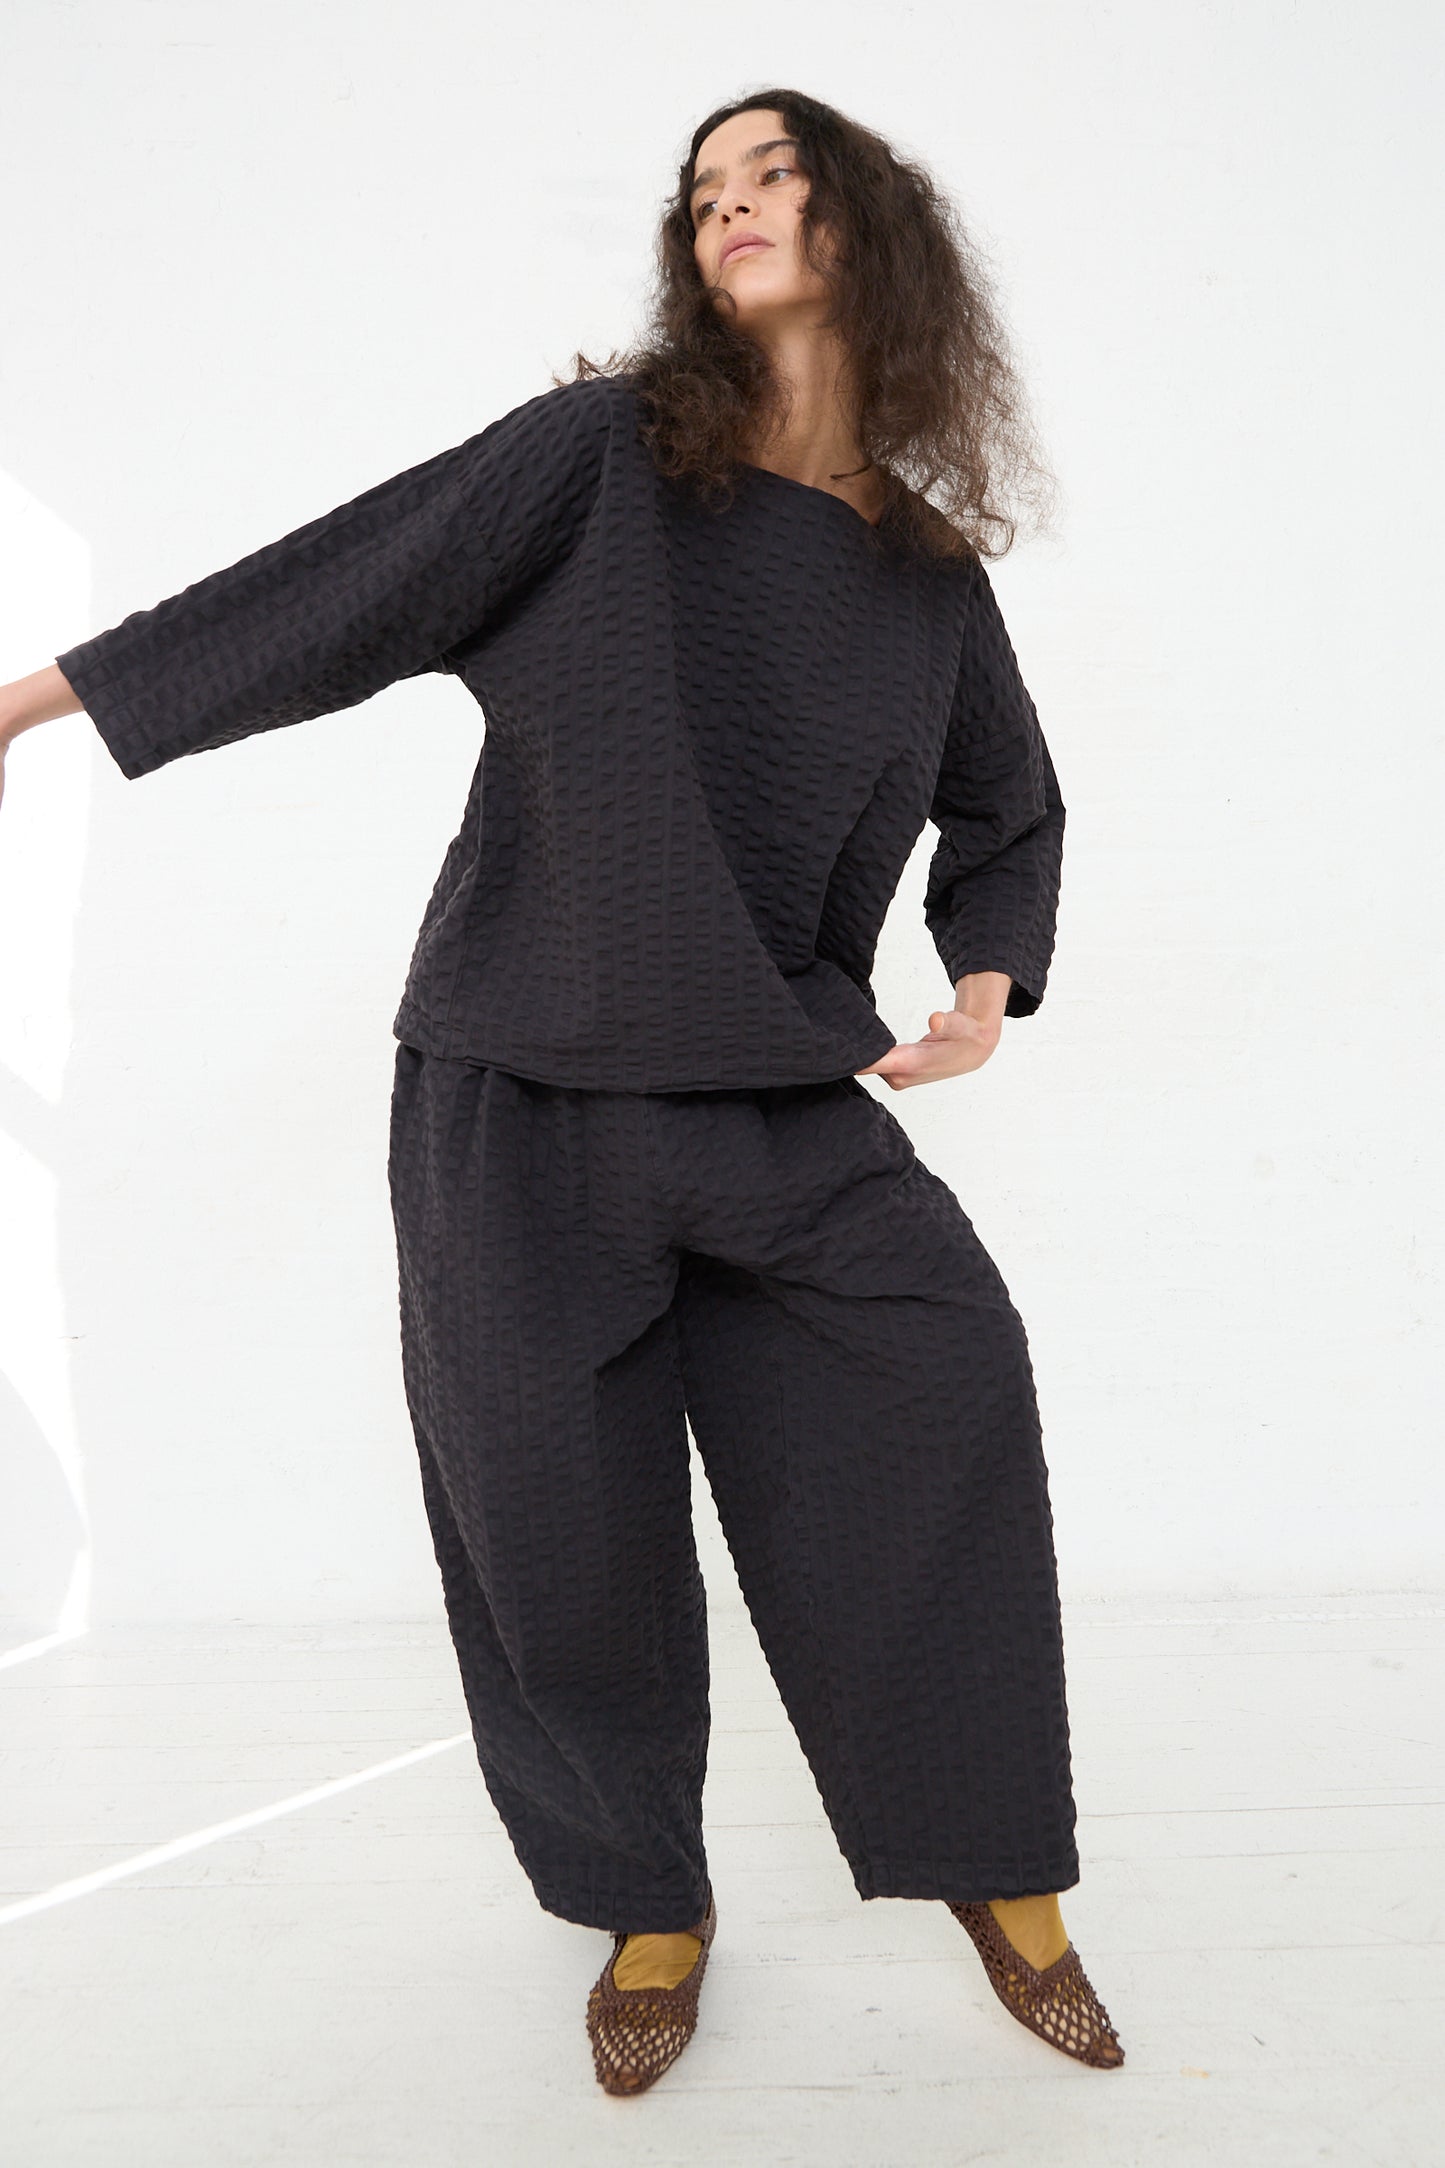 A person standing in a relaxed pose wearing a textured dark Black Crane Cotton Seersucker Square Neck Top in Ink Black outfit with matching pants, complemented by patterned flat shoes.